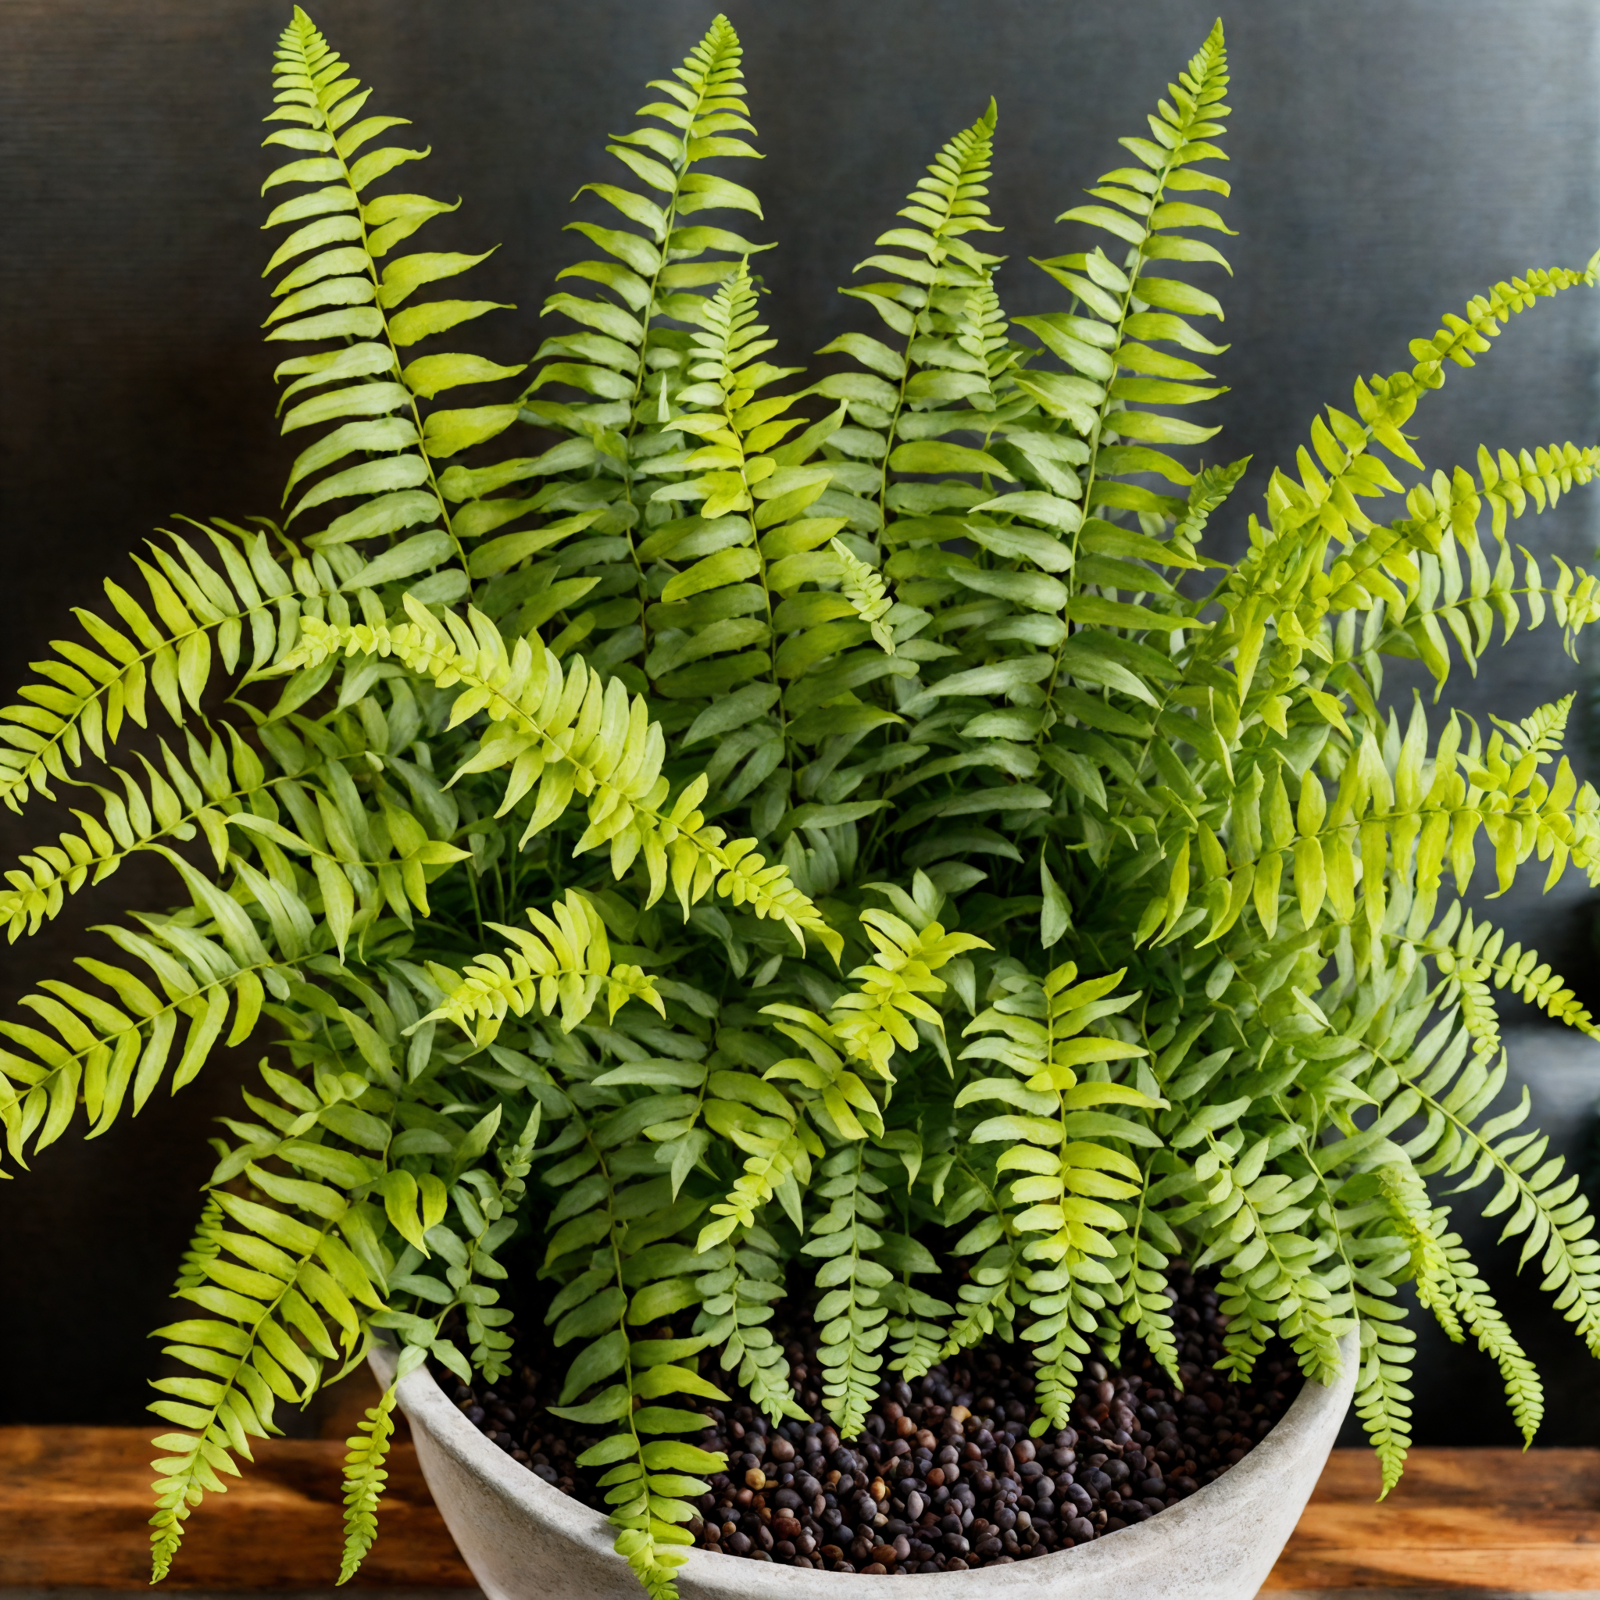 A lush Boston fern (Nephrolepis exaltata) in a planter, with clear lighting and a dark background.